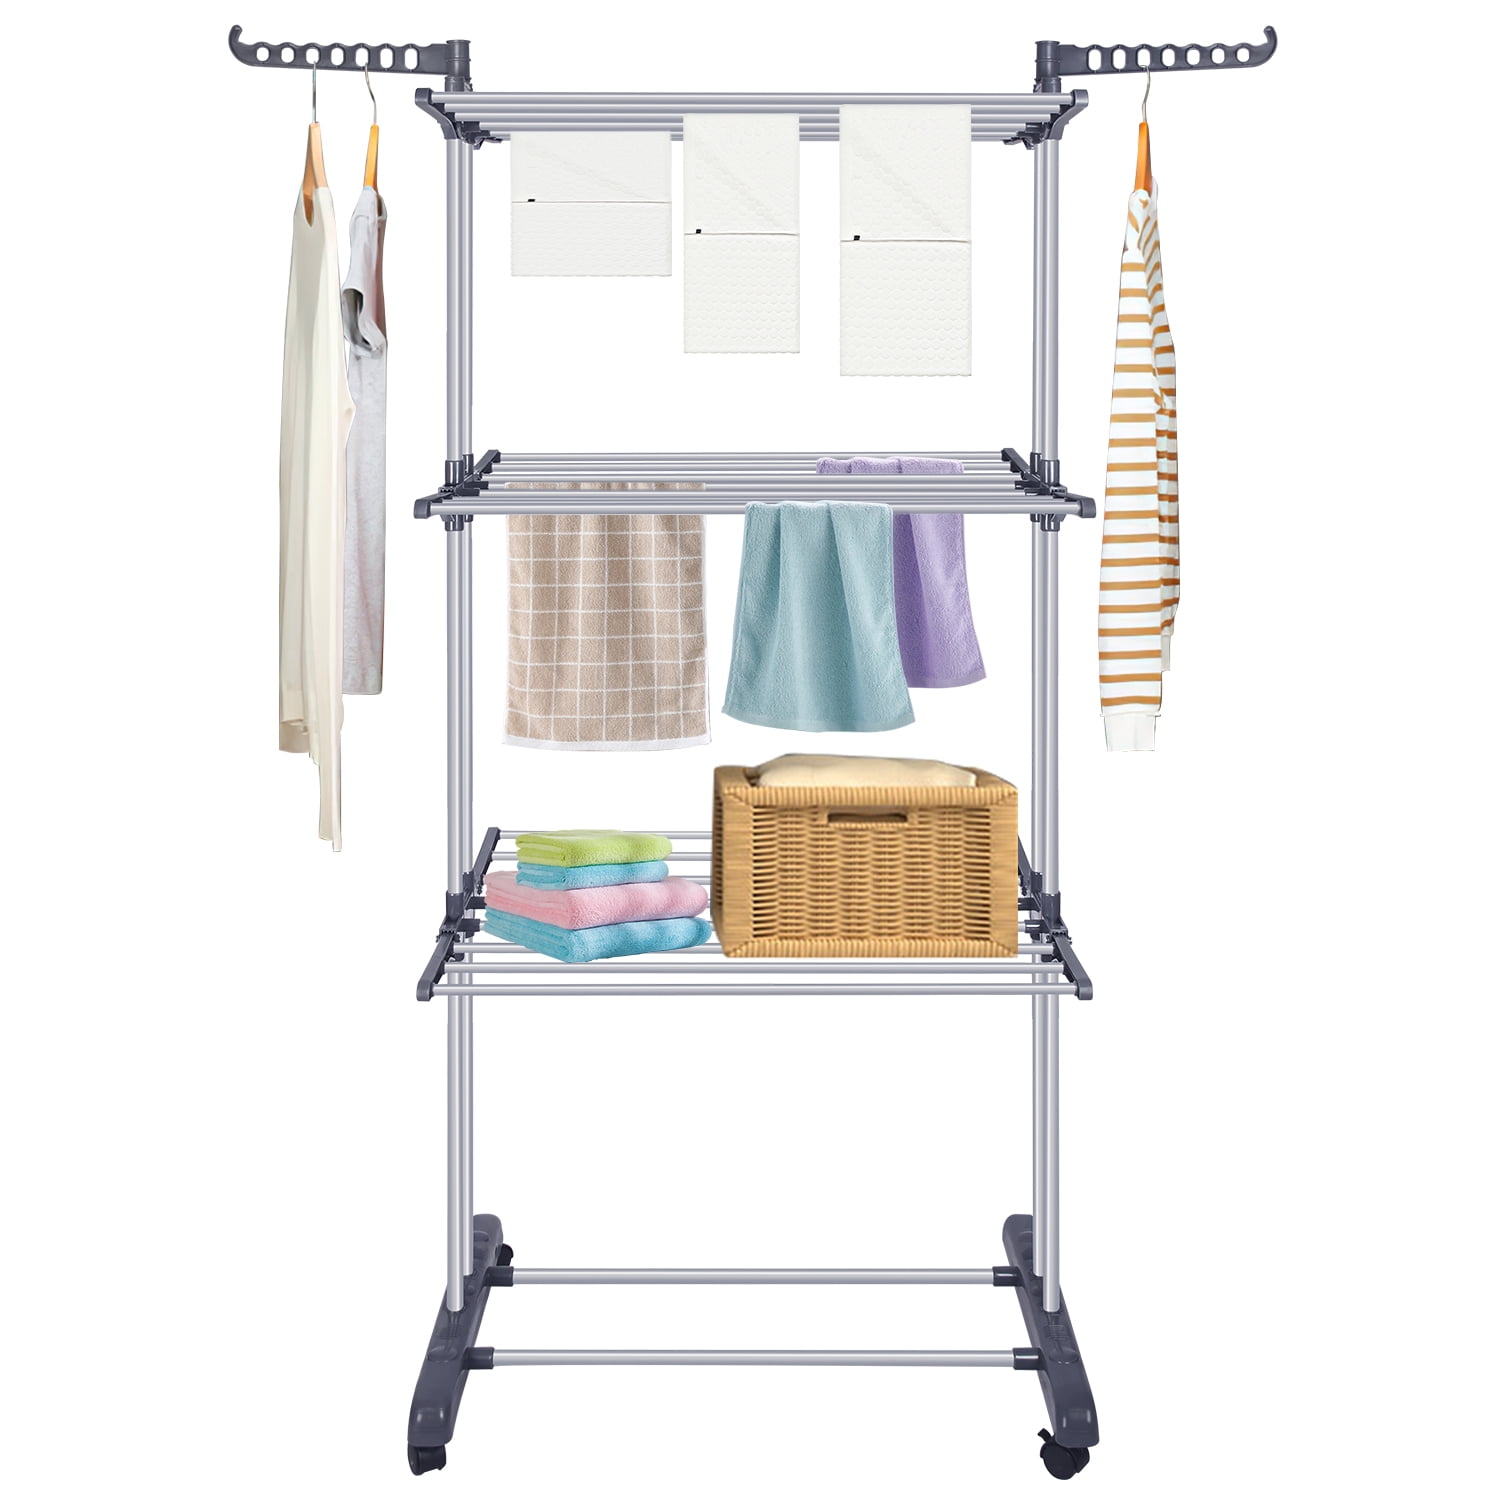 NEW  3-Tier Heated Tower Airer Economic & Free Cover Pack  Folds for Storage 